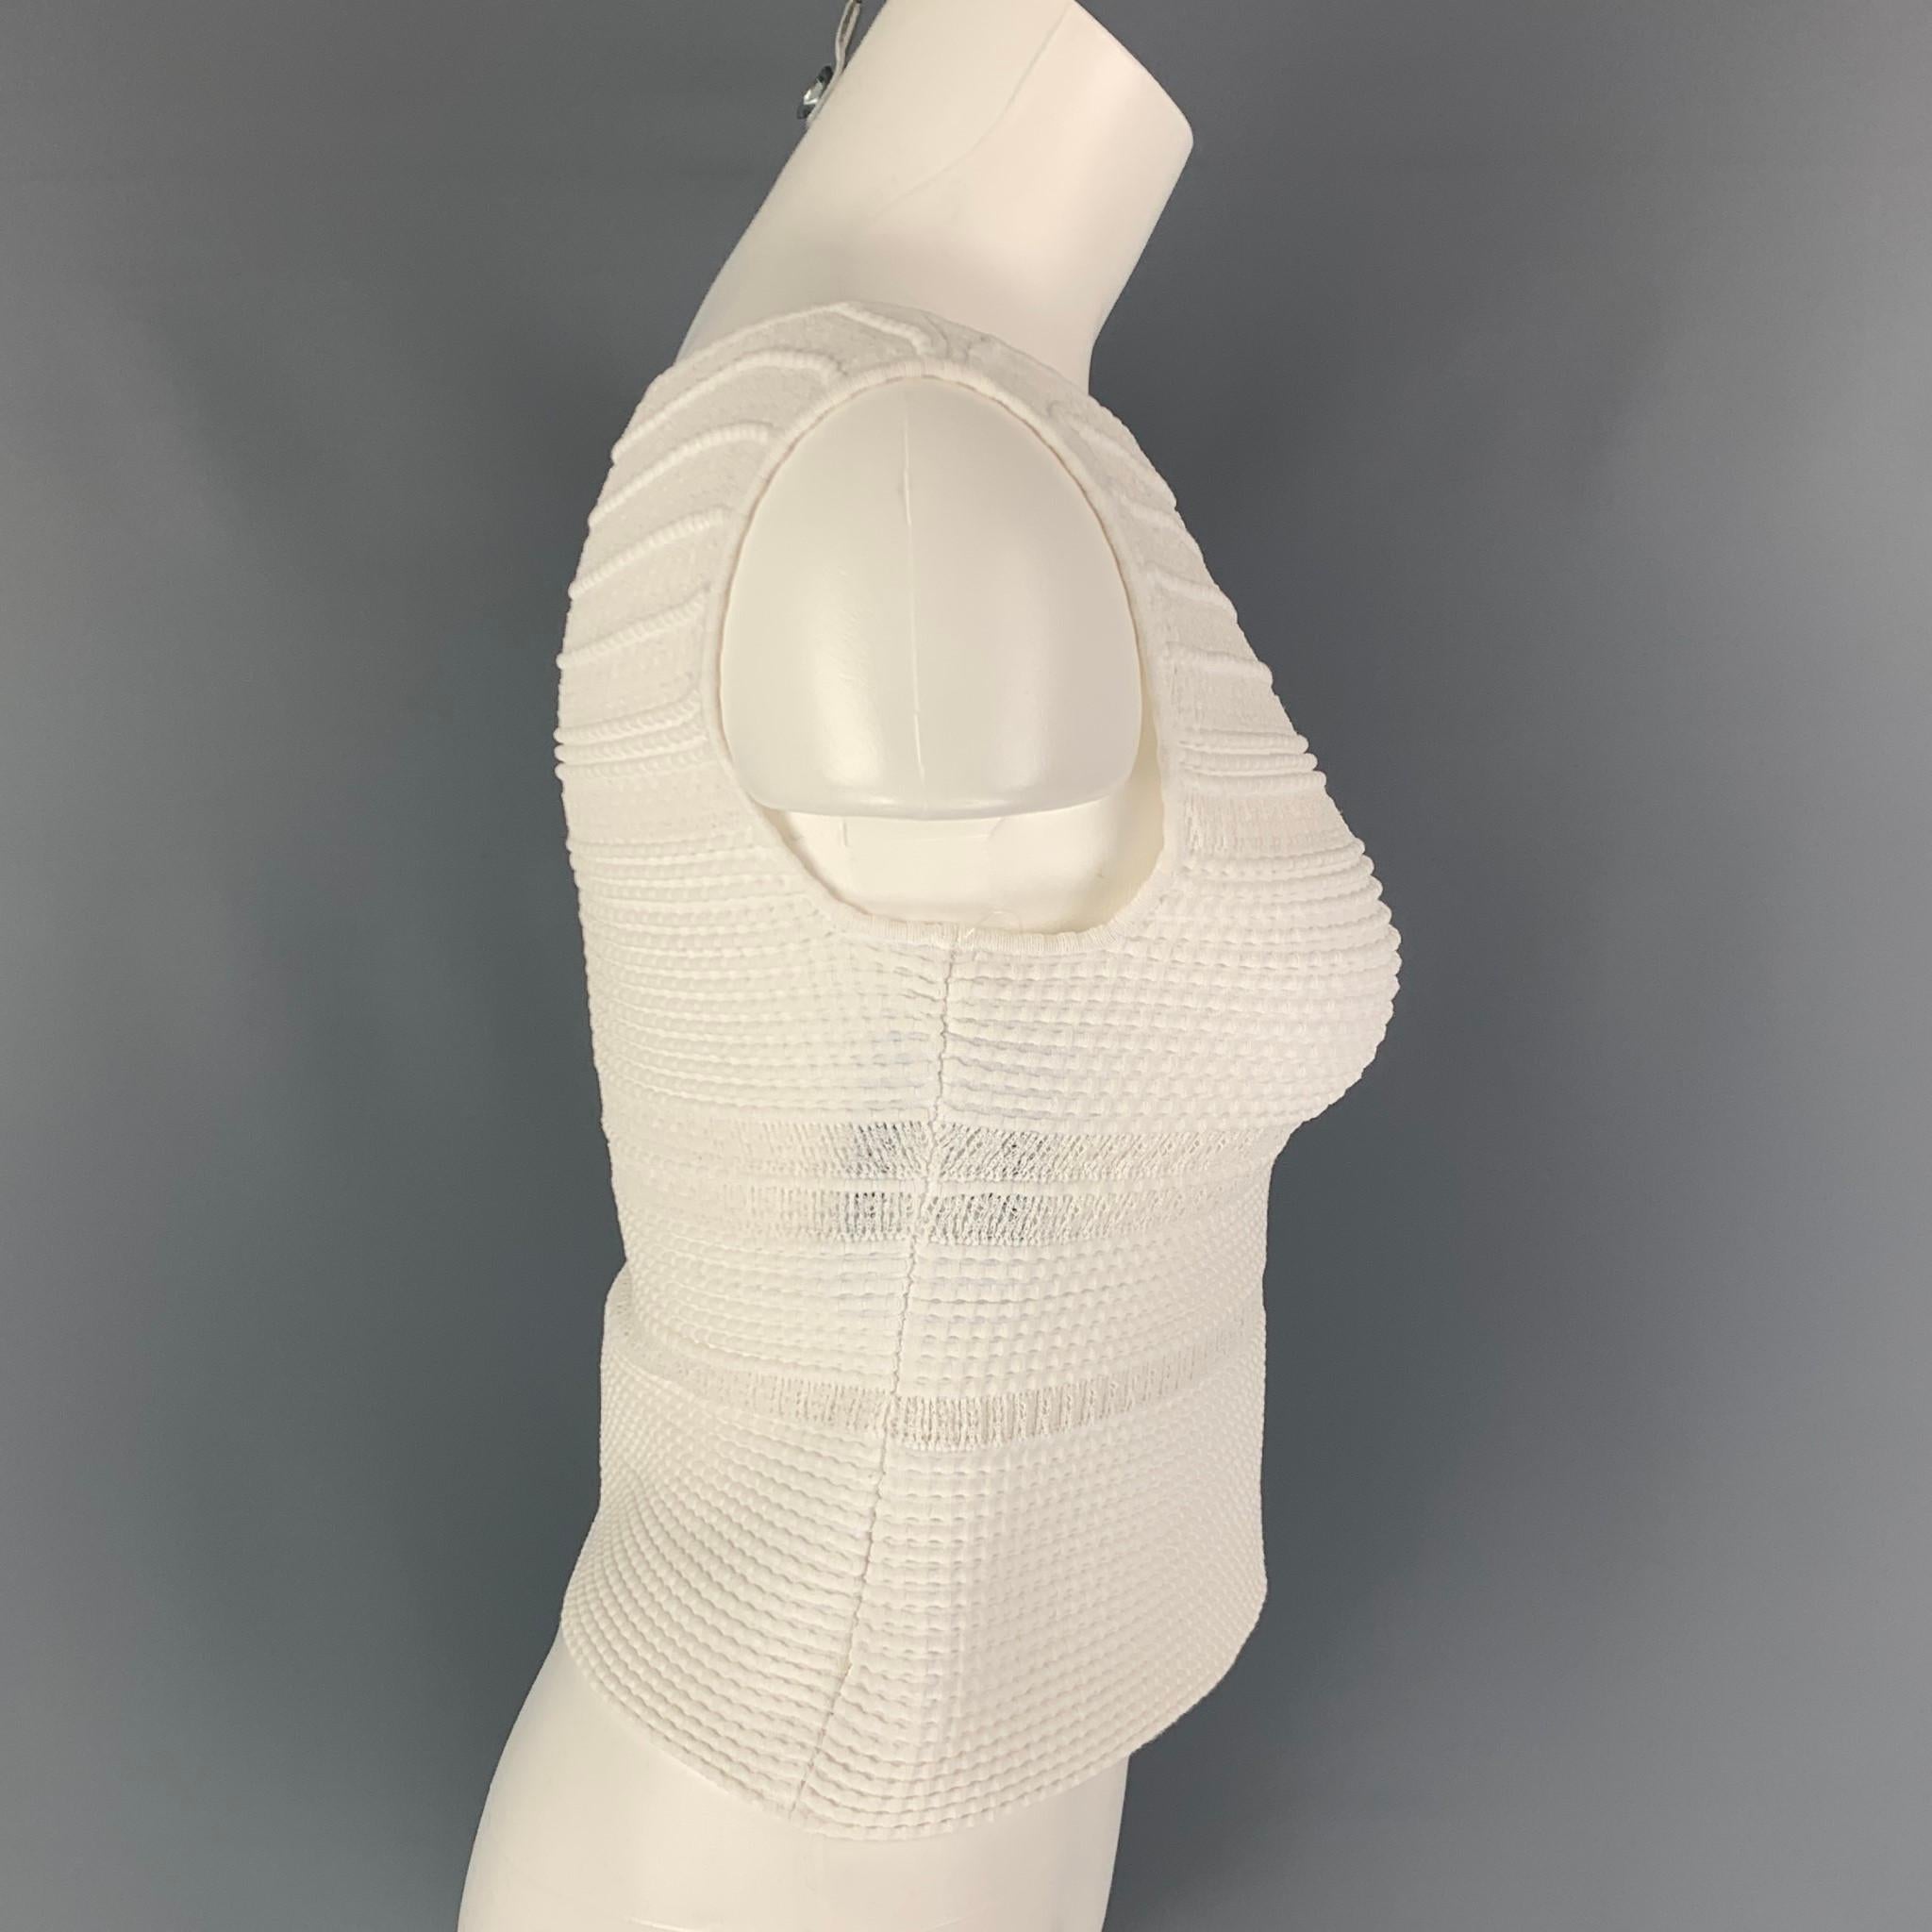 ALAIA dress top comes in a white knitted textured stretch cotton blend featuring a sleeveless style and a side zipper closure. Made in Italy. 

Very Good Pre-Owned Condition.
Marked: 42

Measurements:

Shoulder: 13 in.
Bust: 30 in.
Length: 16 in.